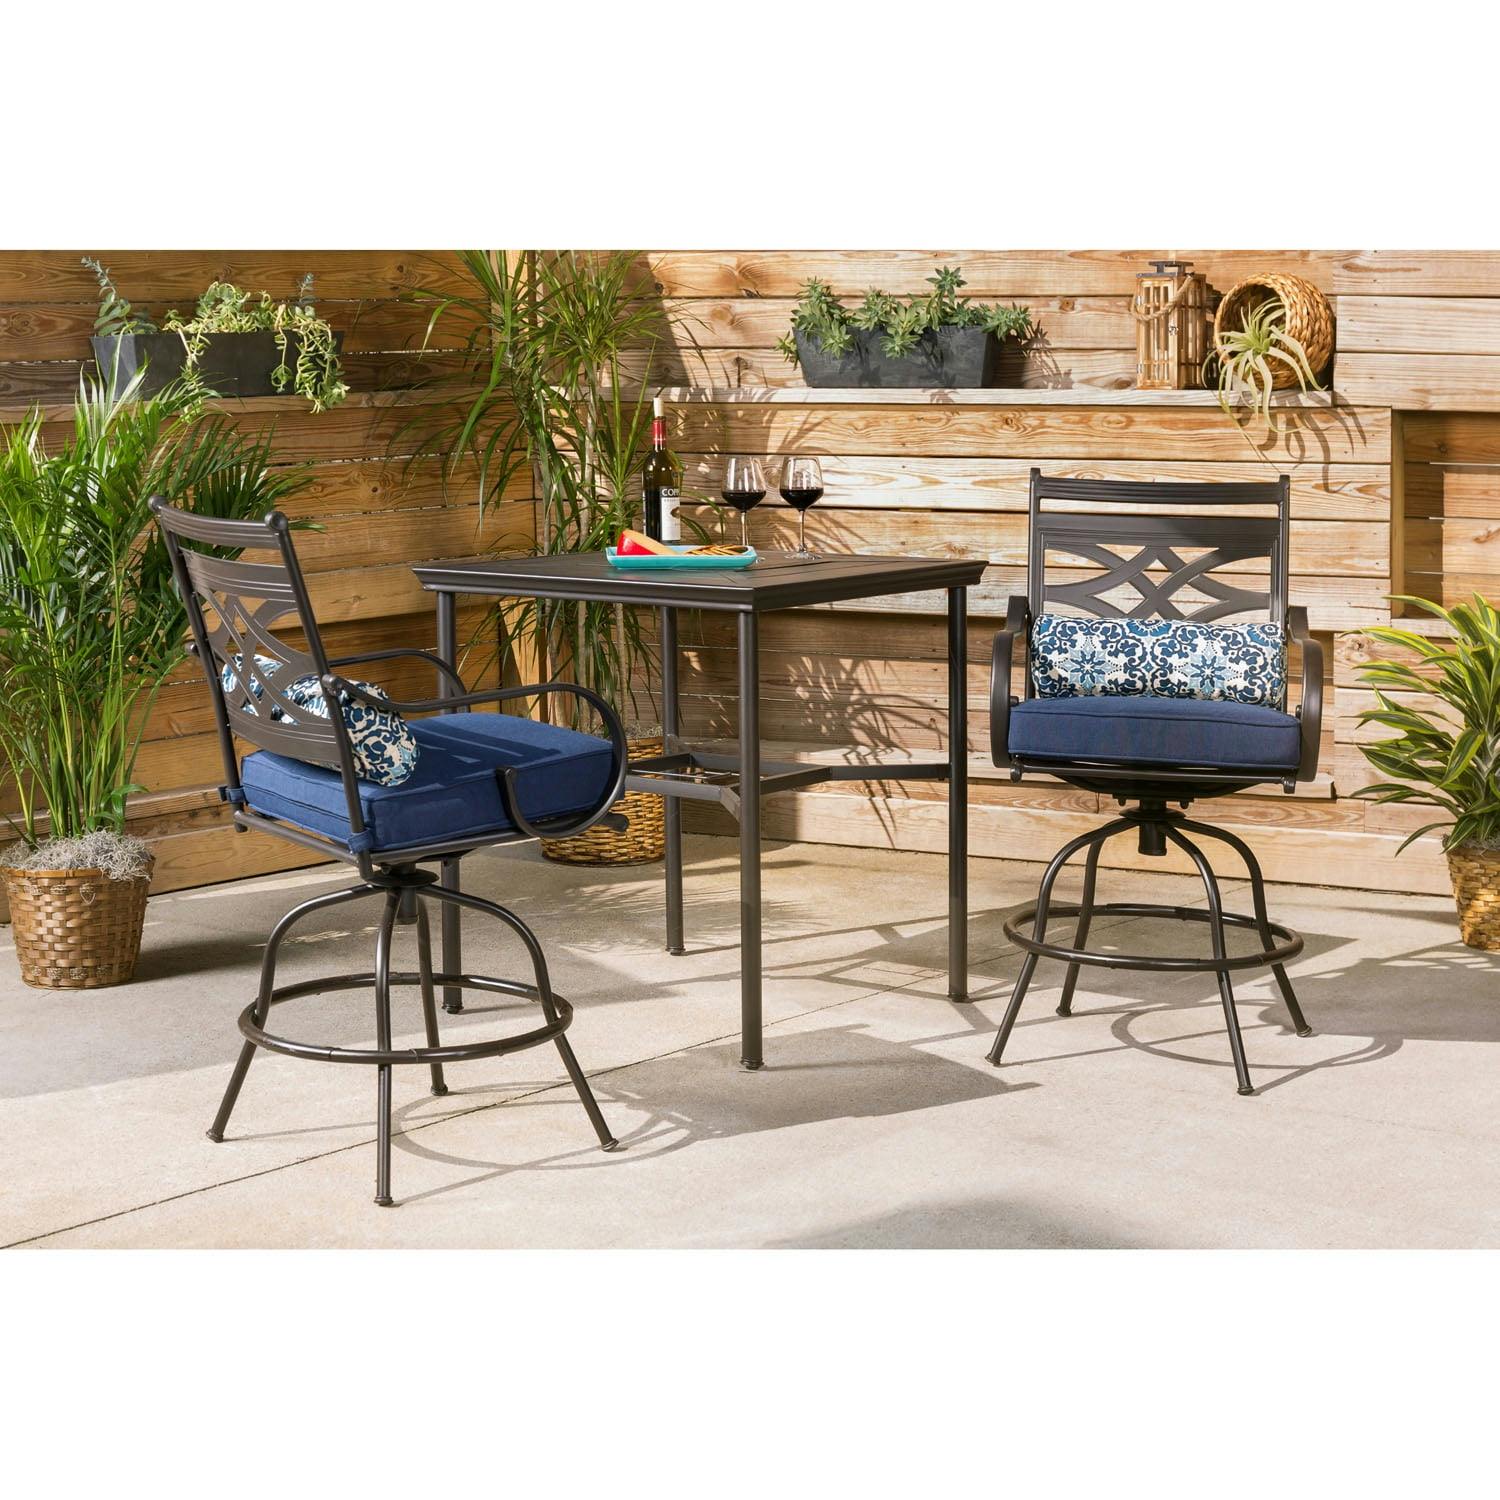 Elegant Navy Blue 3-Piece High-Dining Patio Set with Swivel Chairs